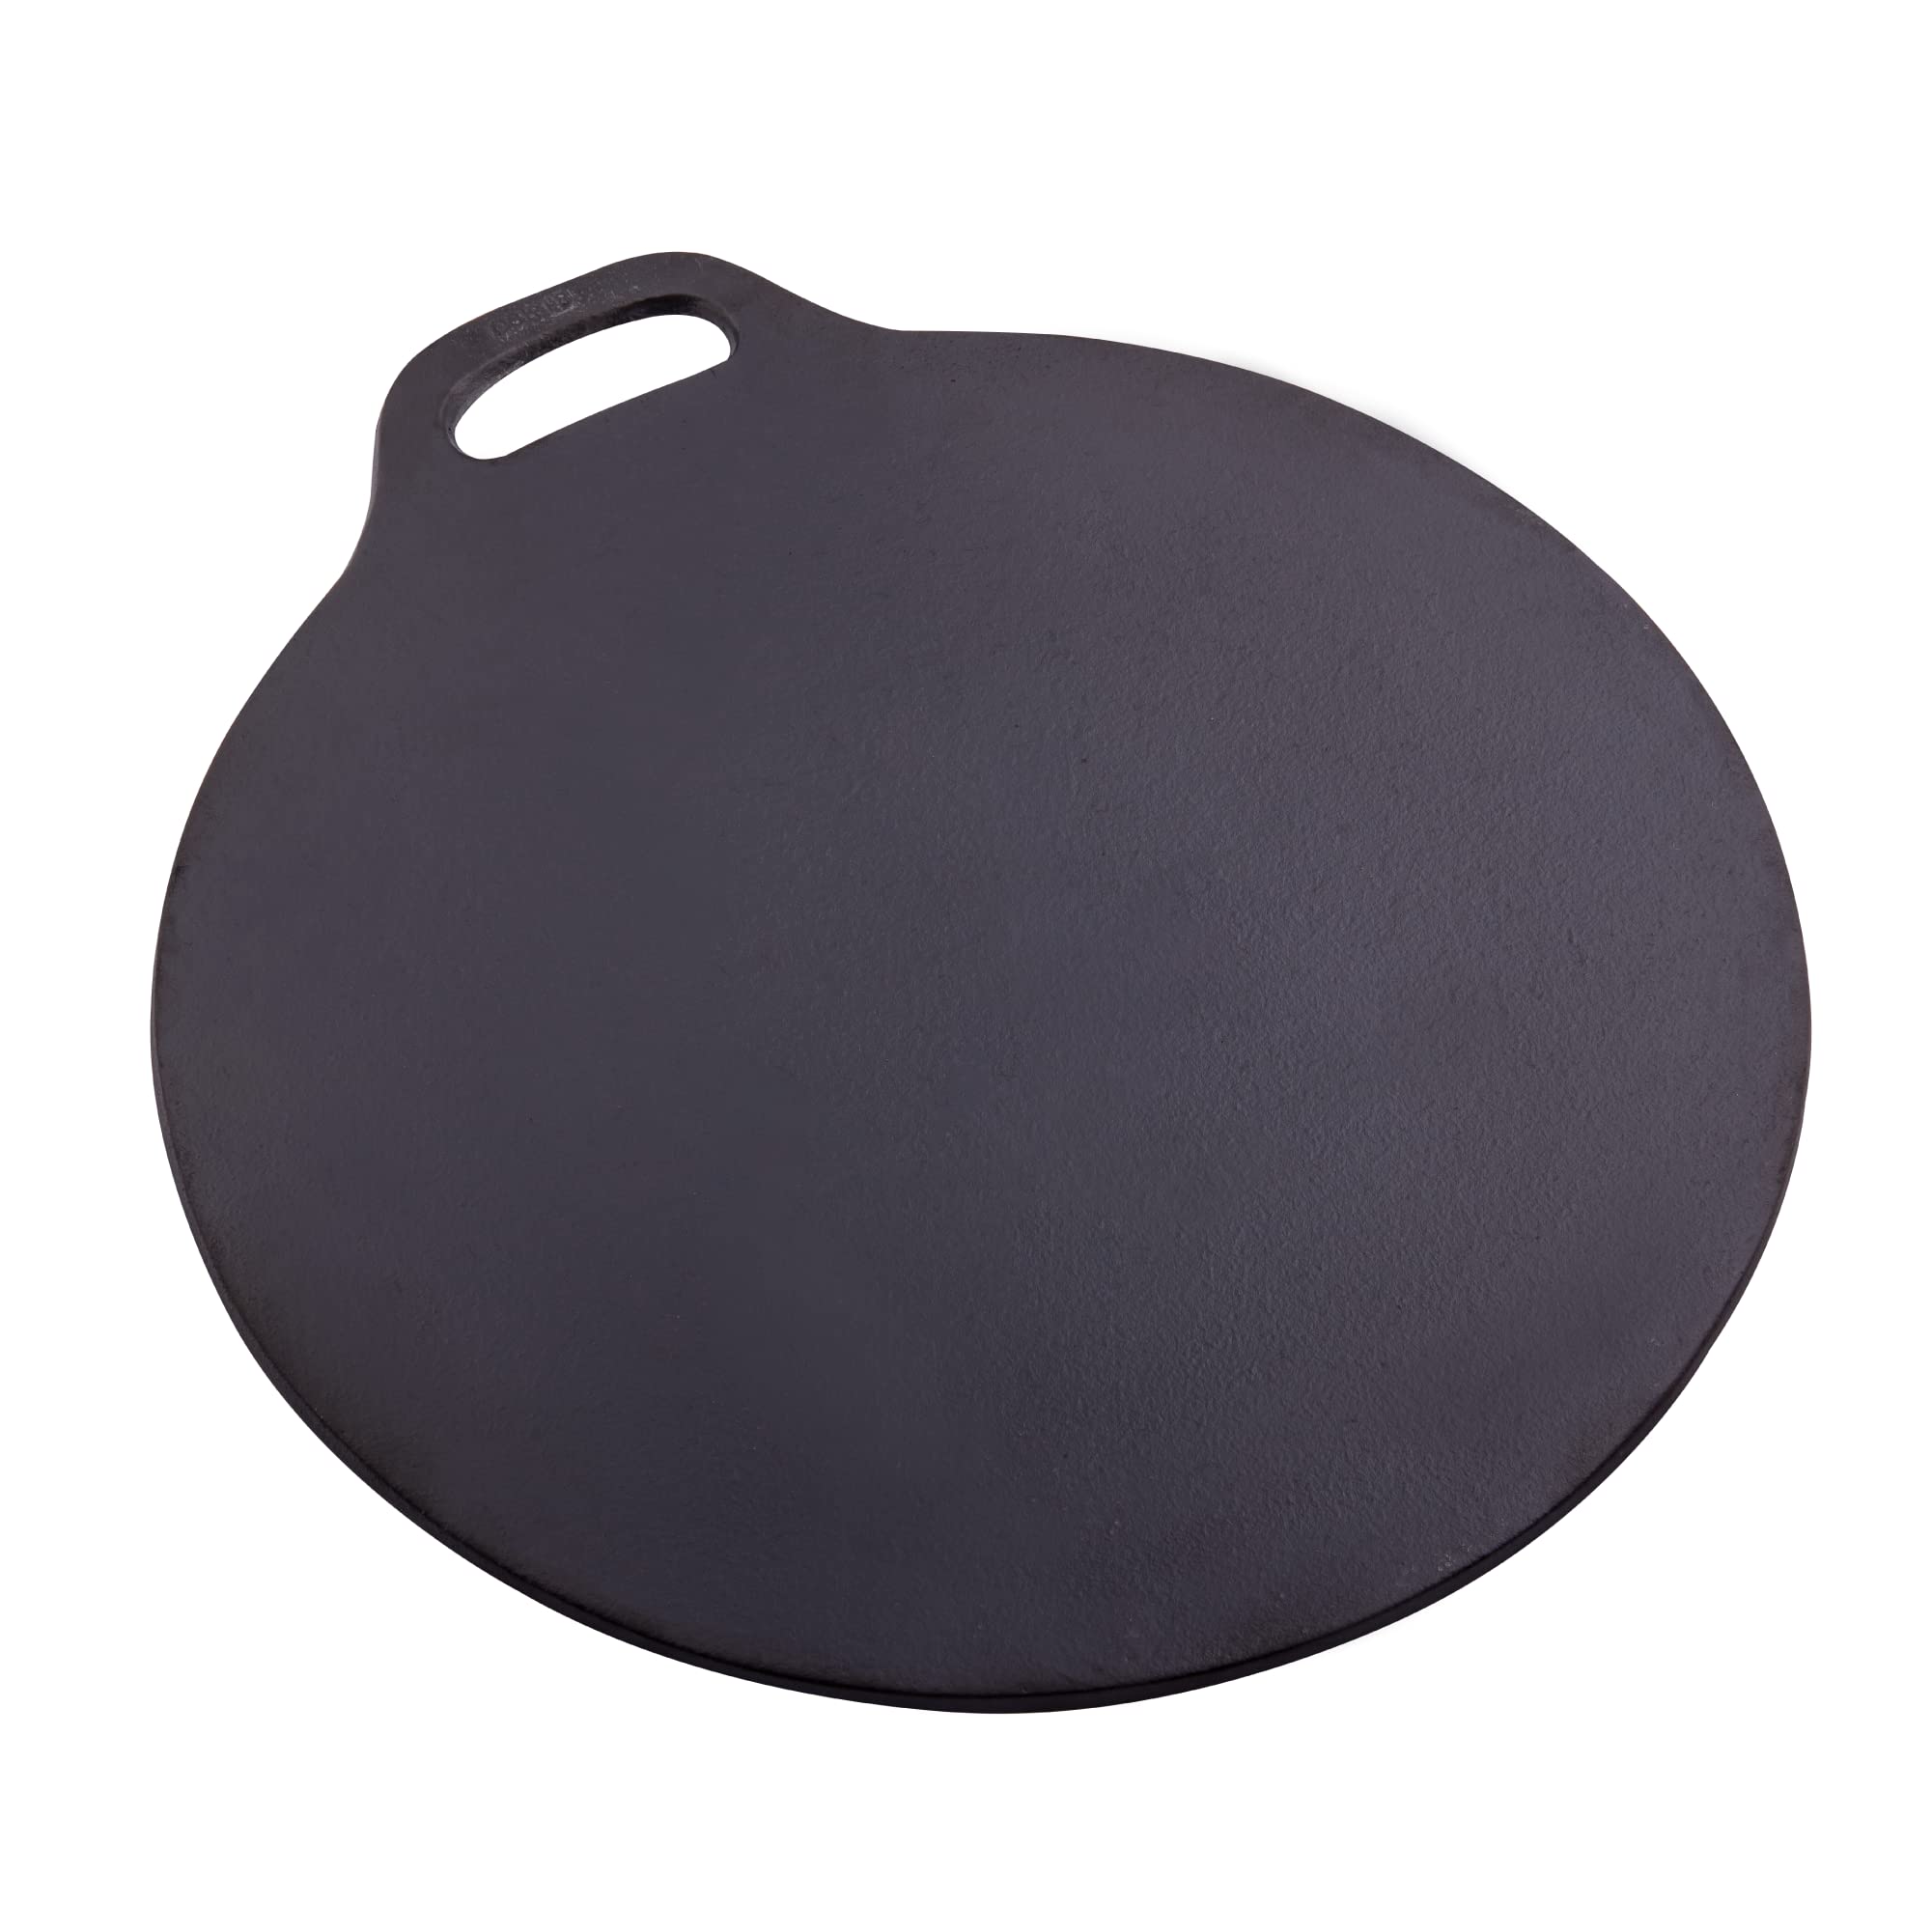 Victoria 15-Inch Cast-Iron Tawa Dosa Pan, Pizza Pan with a Loop Handle, Crepe Pan Preseasoned with Flaxseed Oil, Made in Colombia